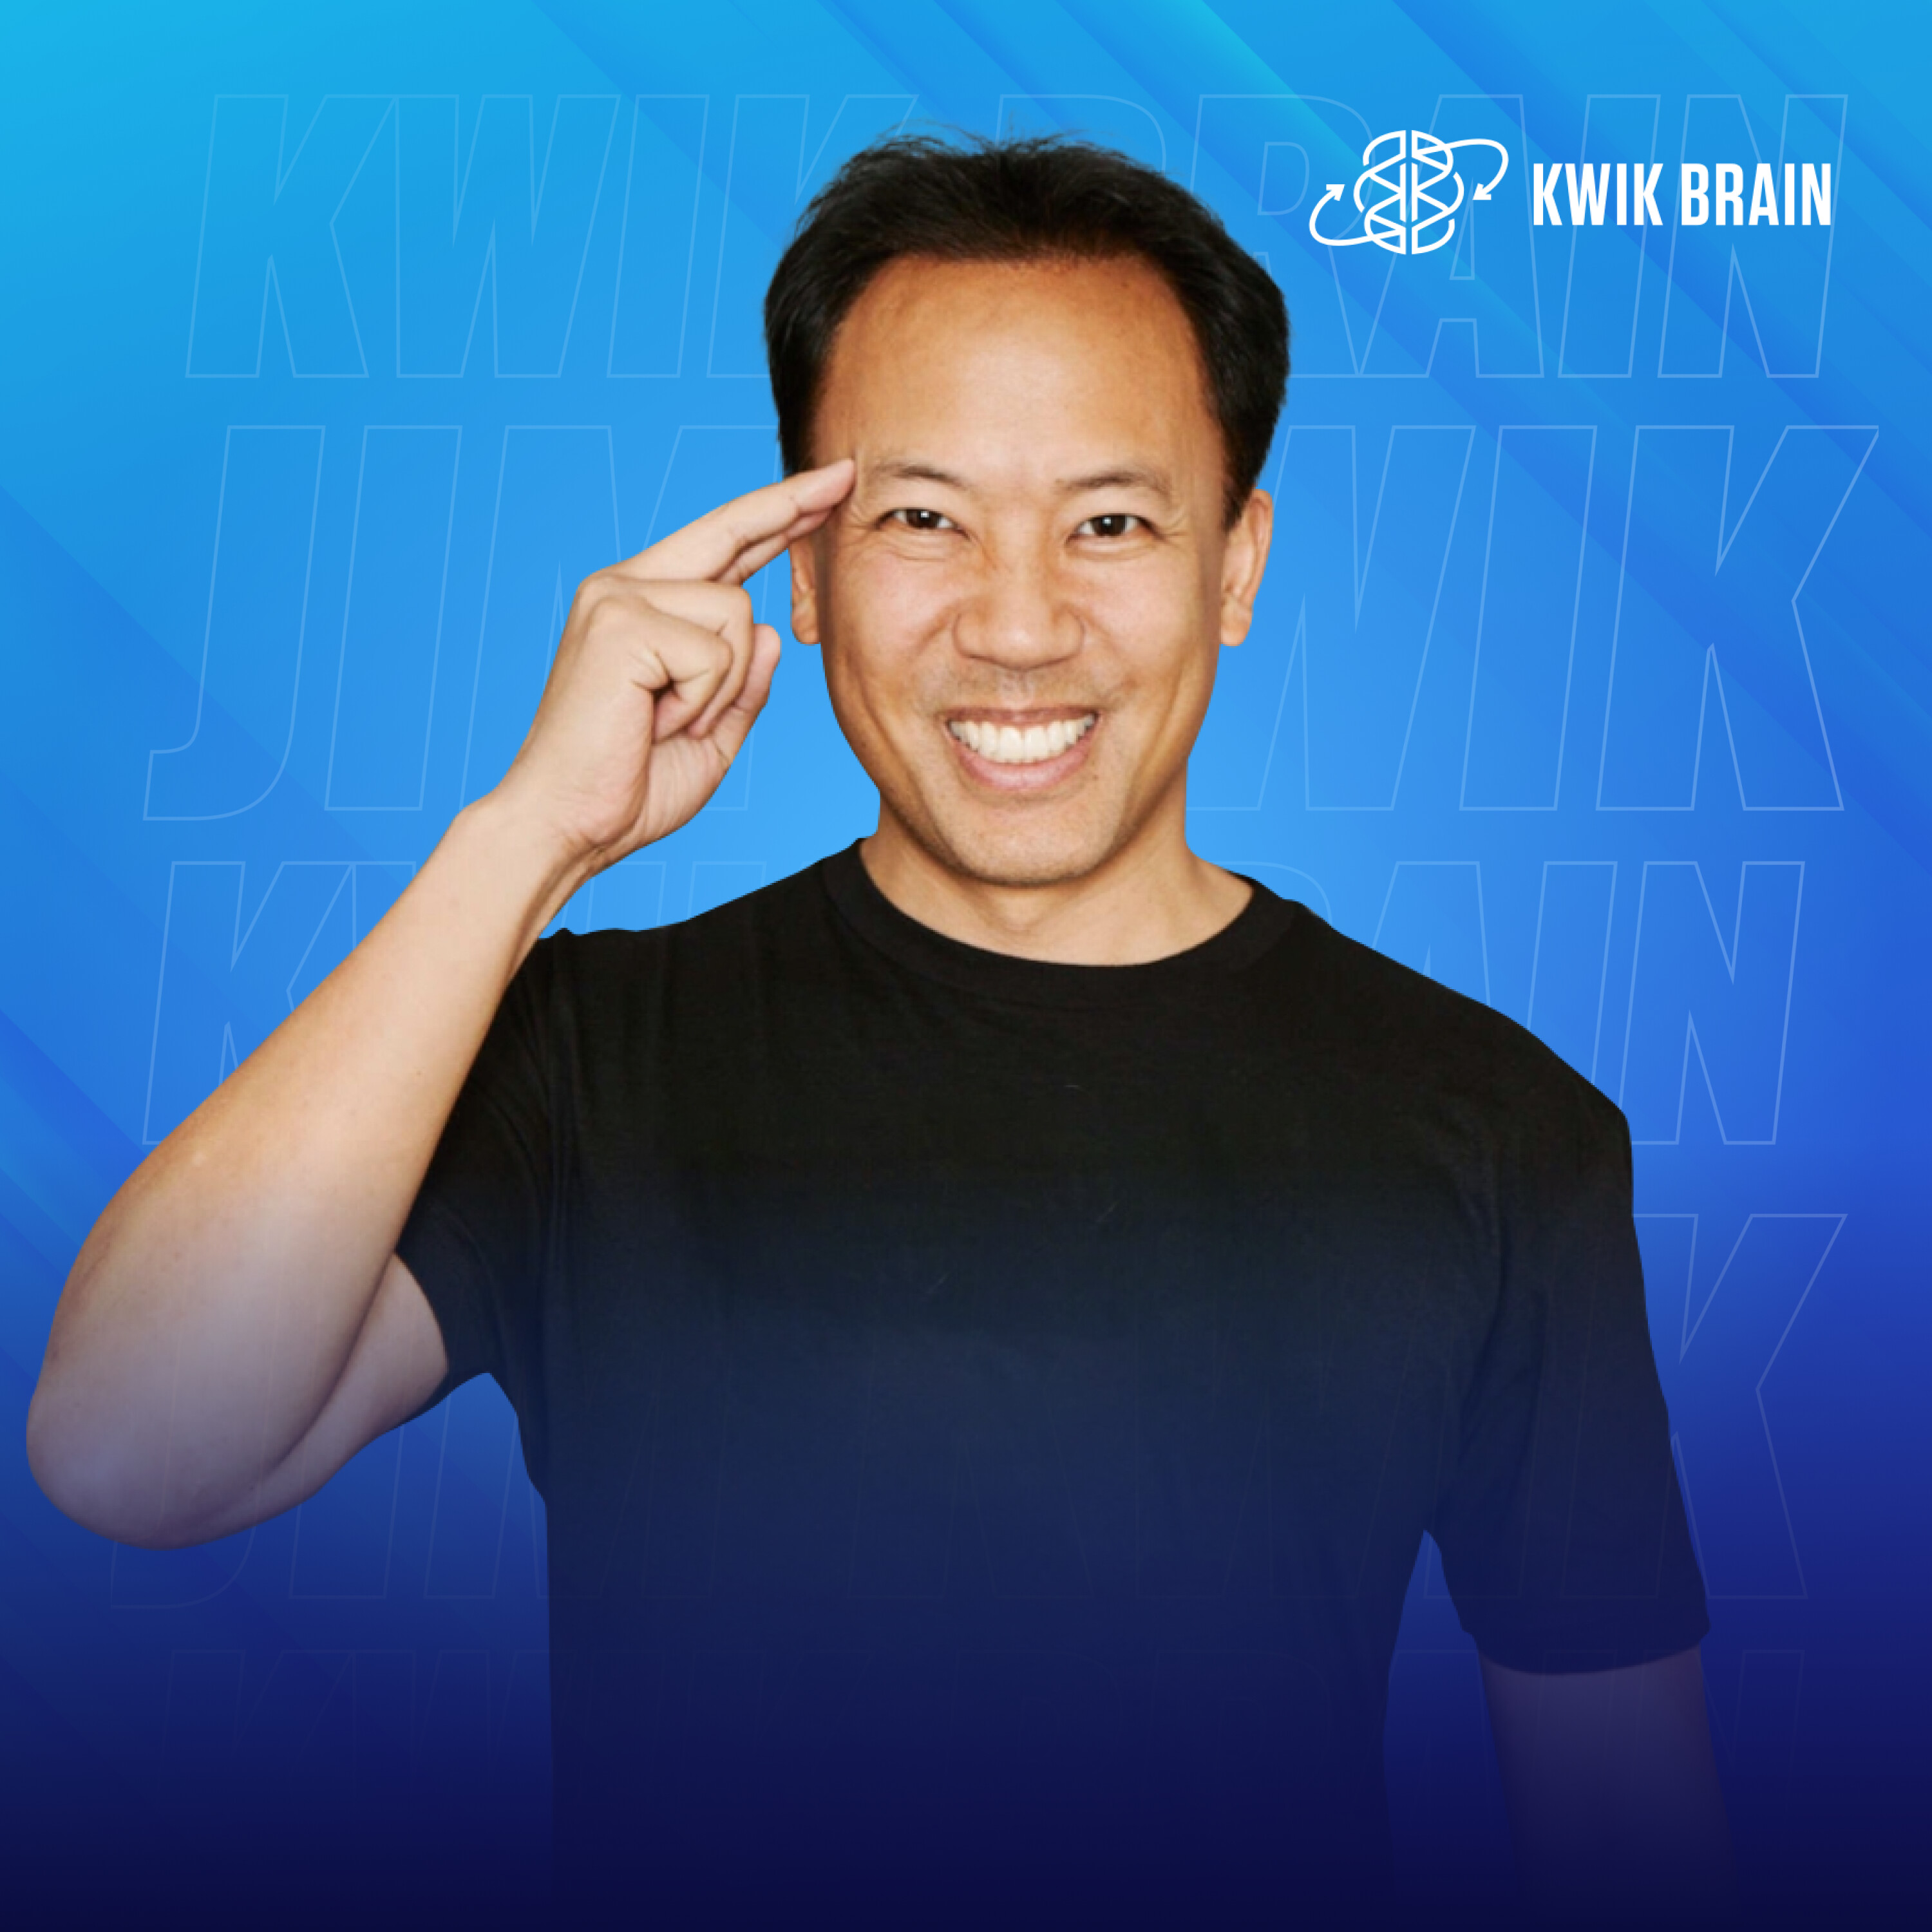 Dreams: Do This To Solve Problems & Generate New Ideas with Jim Kwik